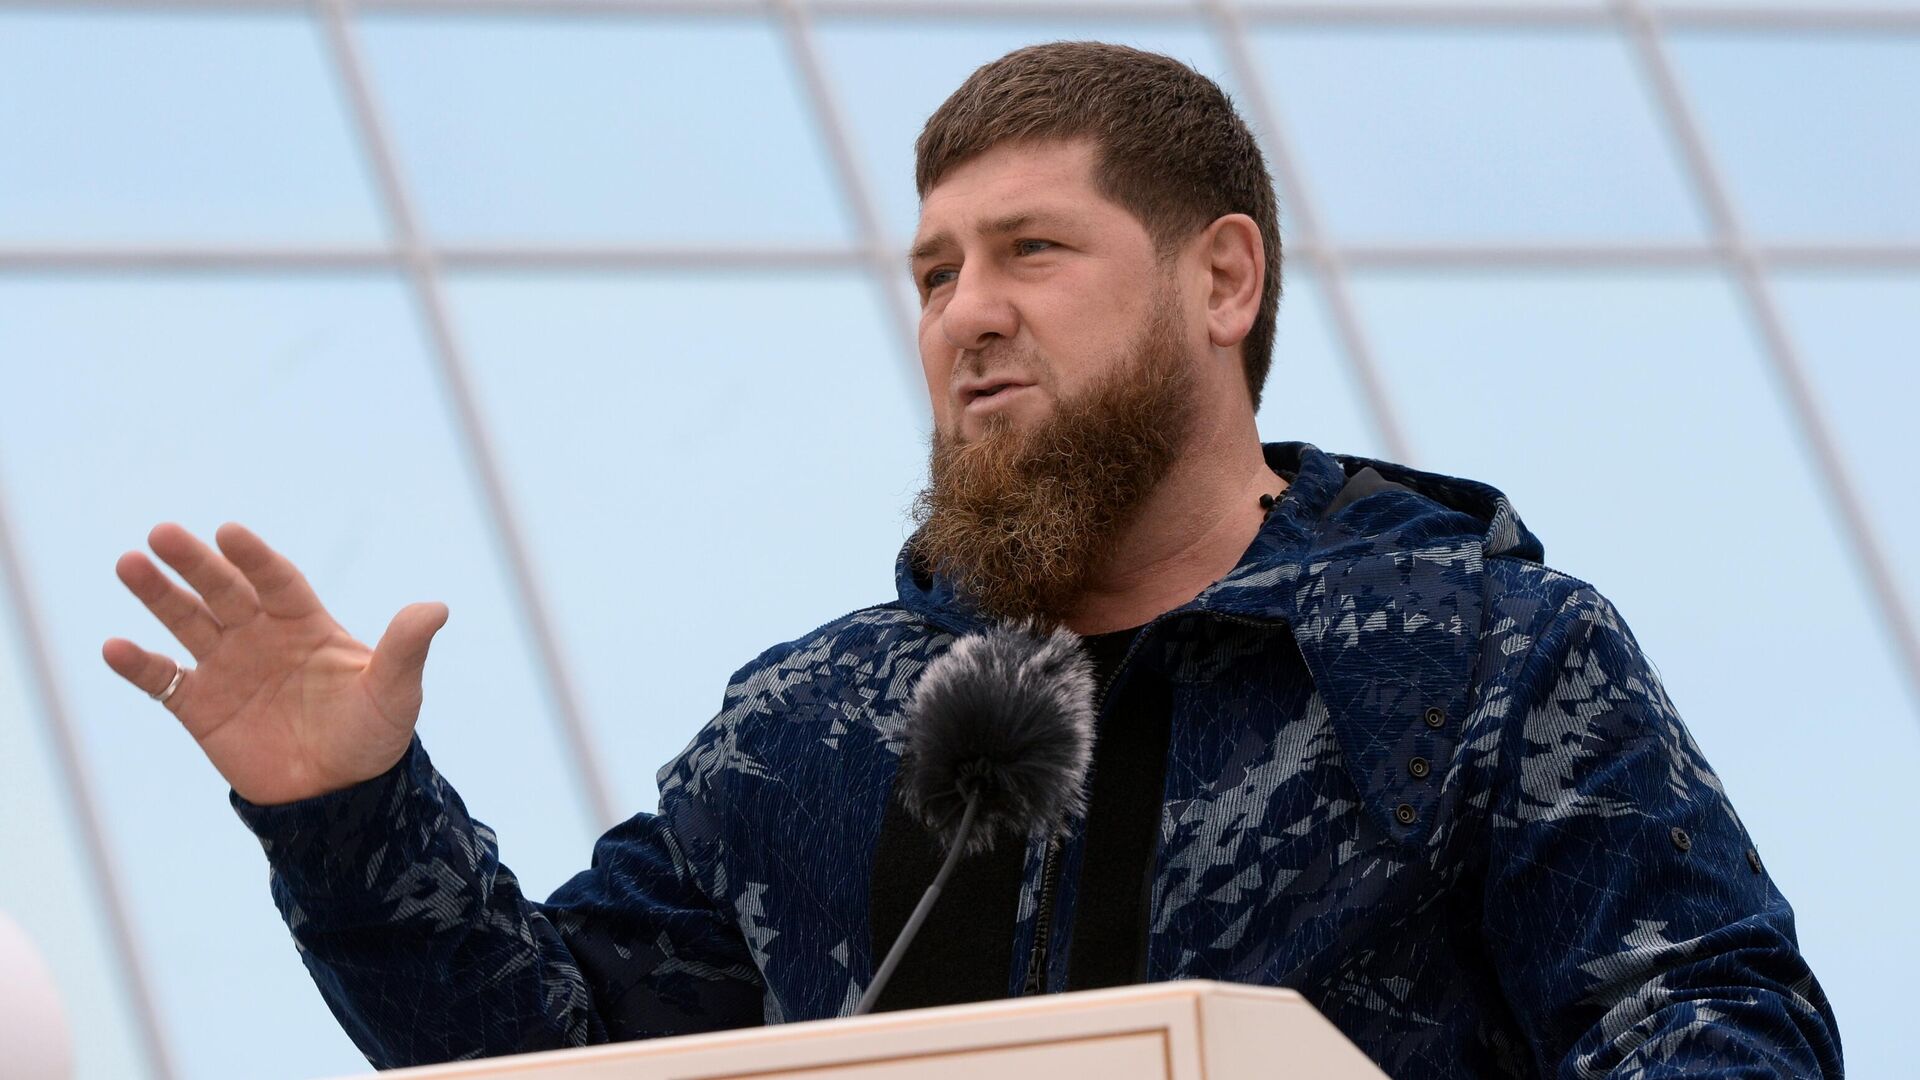 Kadyrov thanked Shoigu for his glowing assessment of Chechnya’s role in the special operation